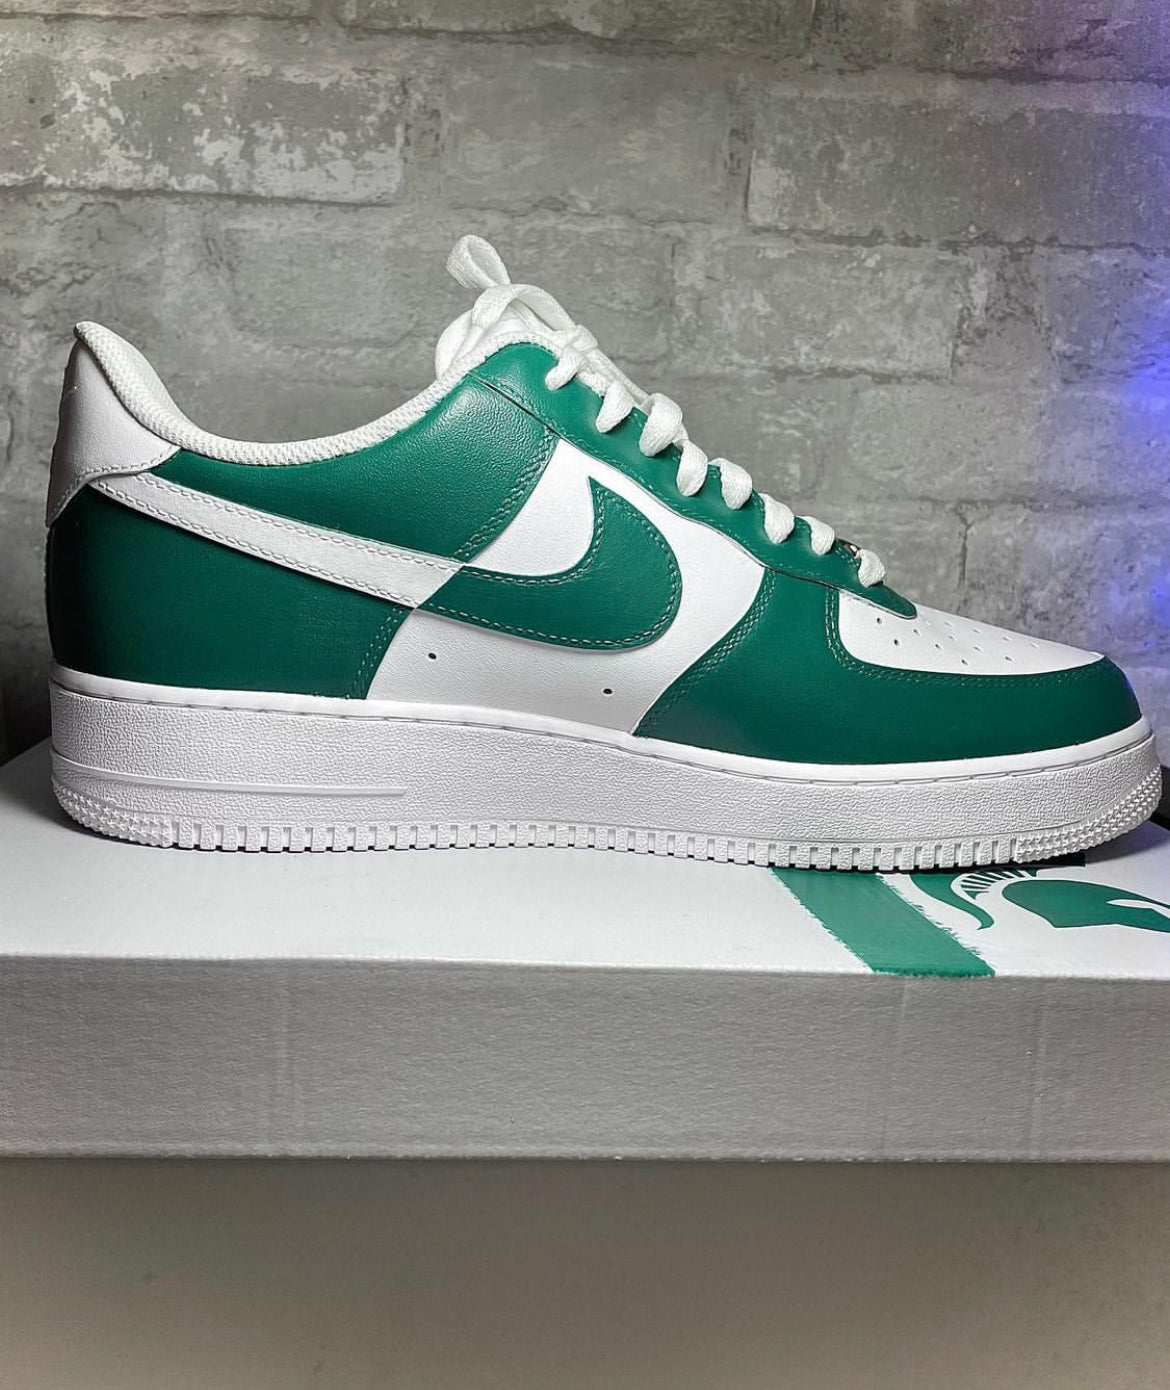 The Nike Air Force 1 Low Forest Green Is Now Available